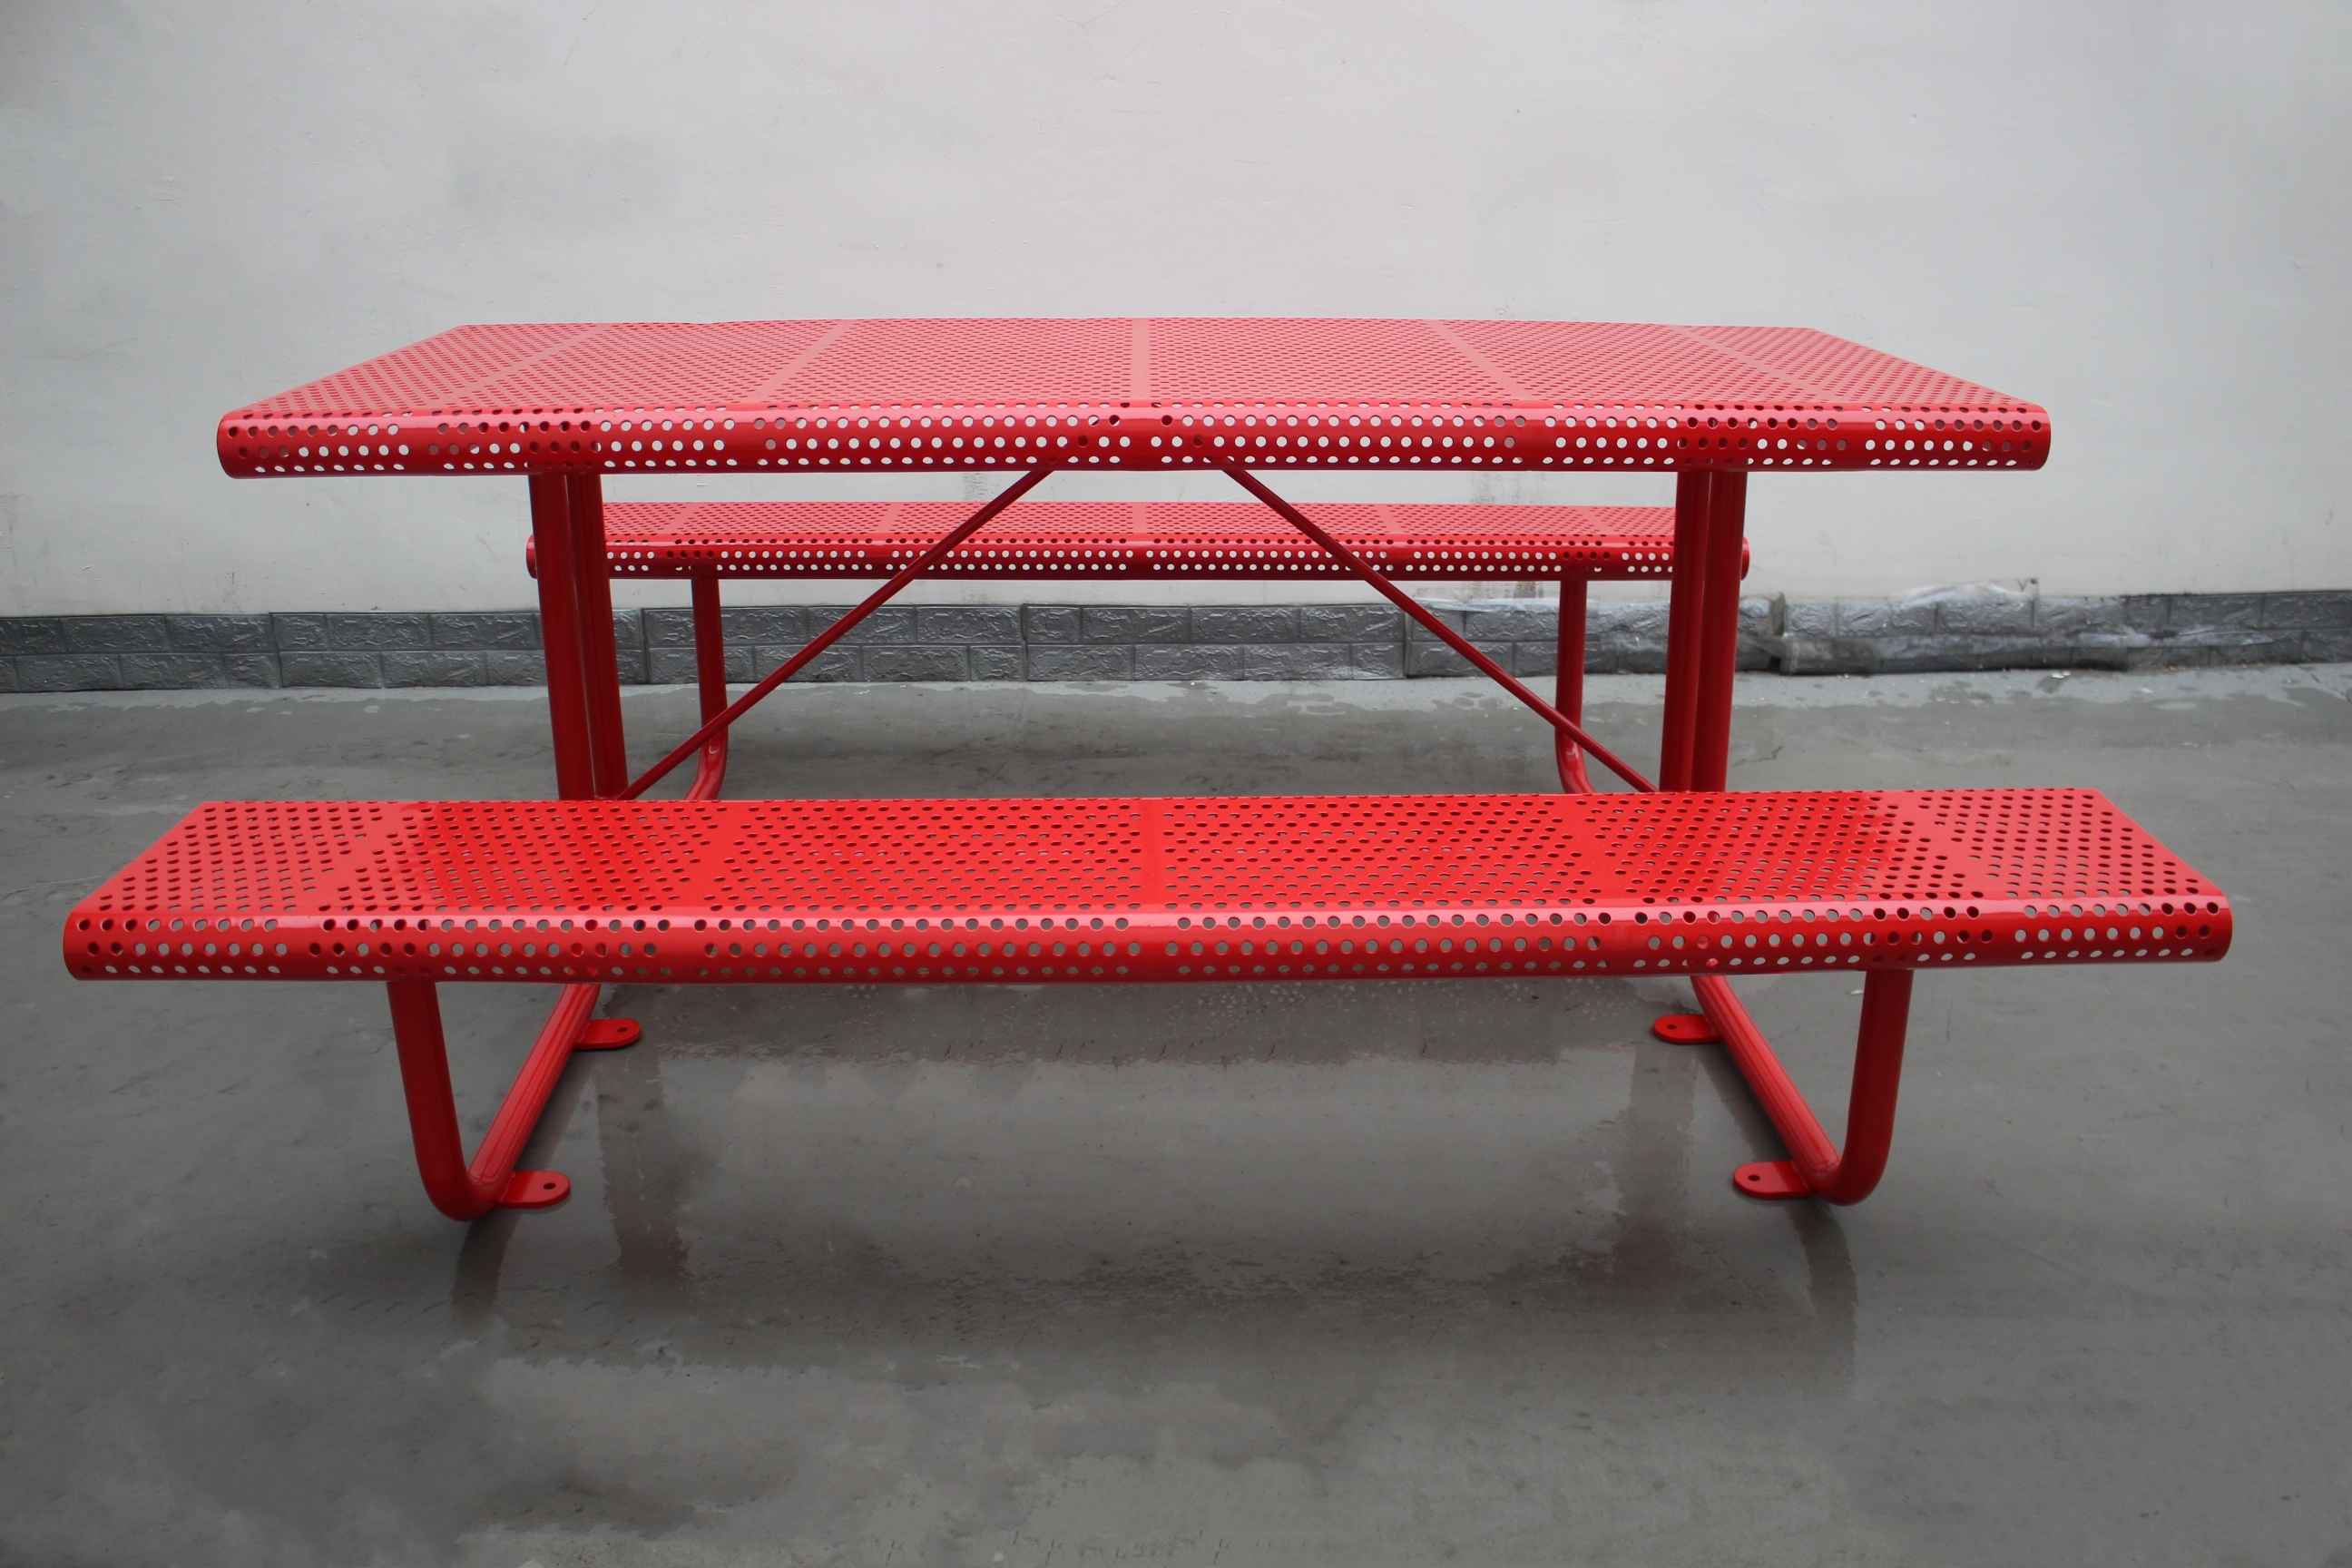 mild steel picnic table, perforated steel table top and seat pans,one table with two benches,surface mounted